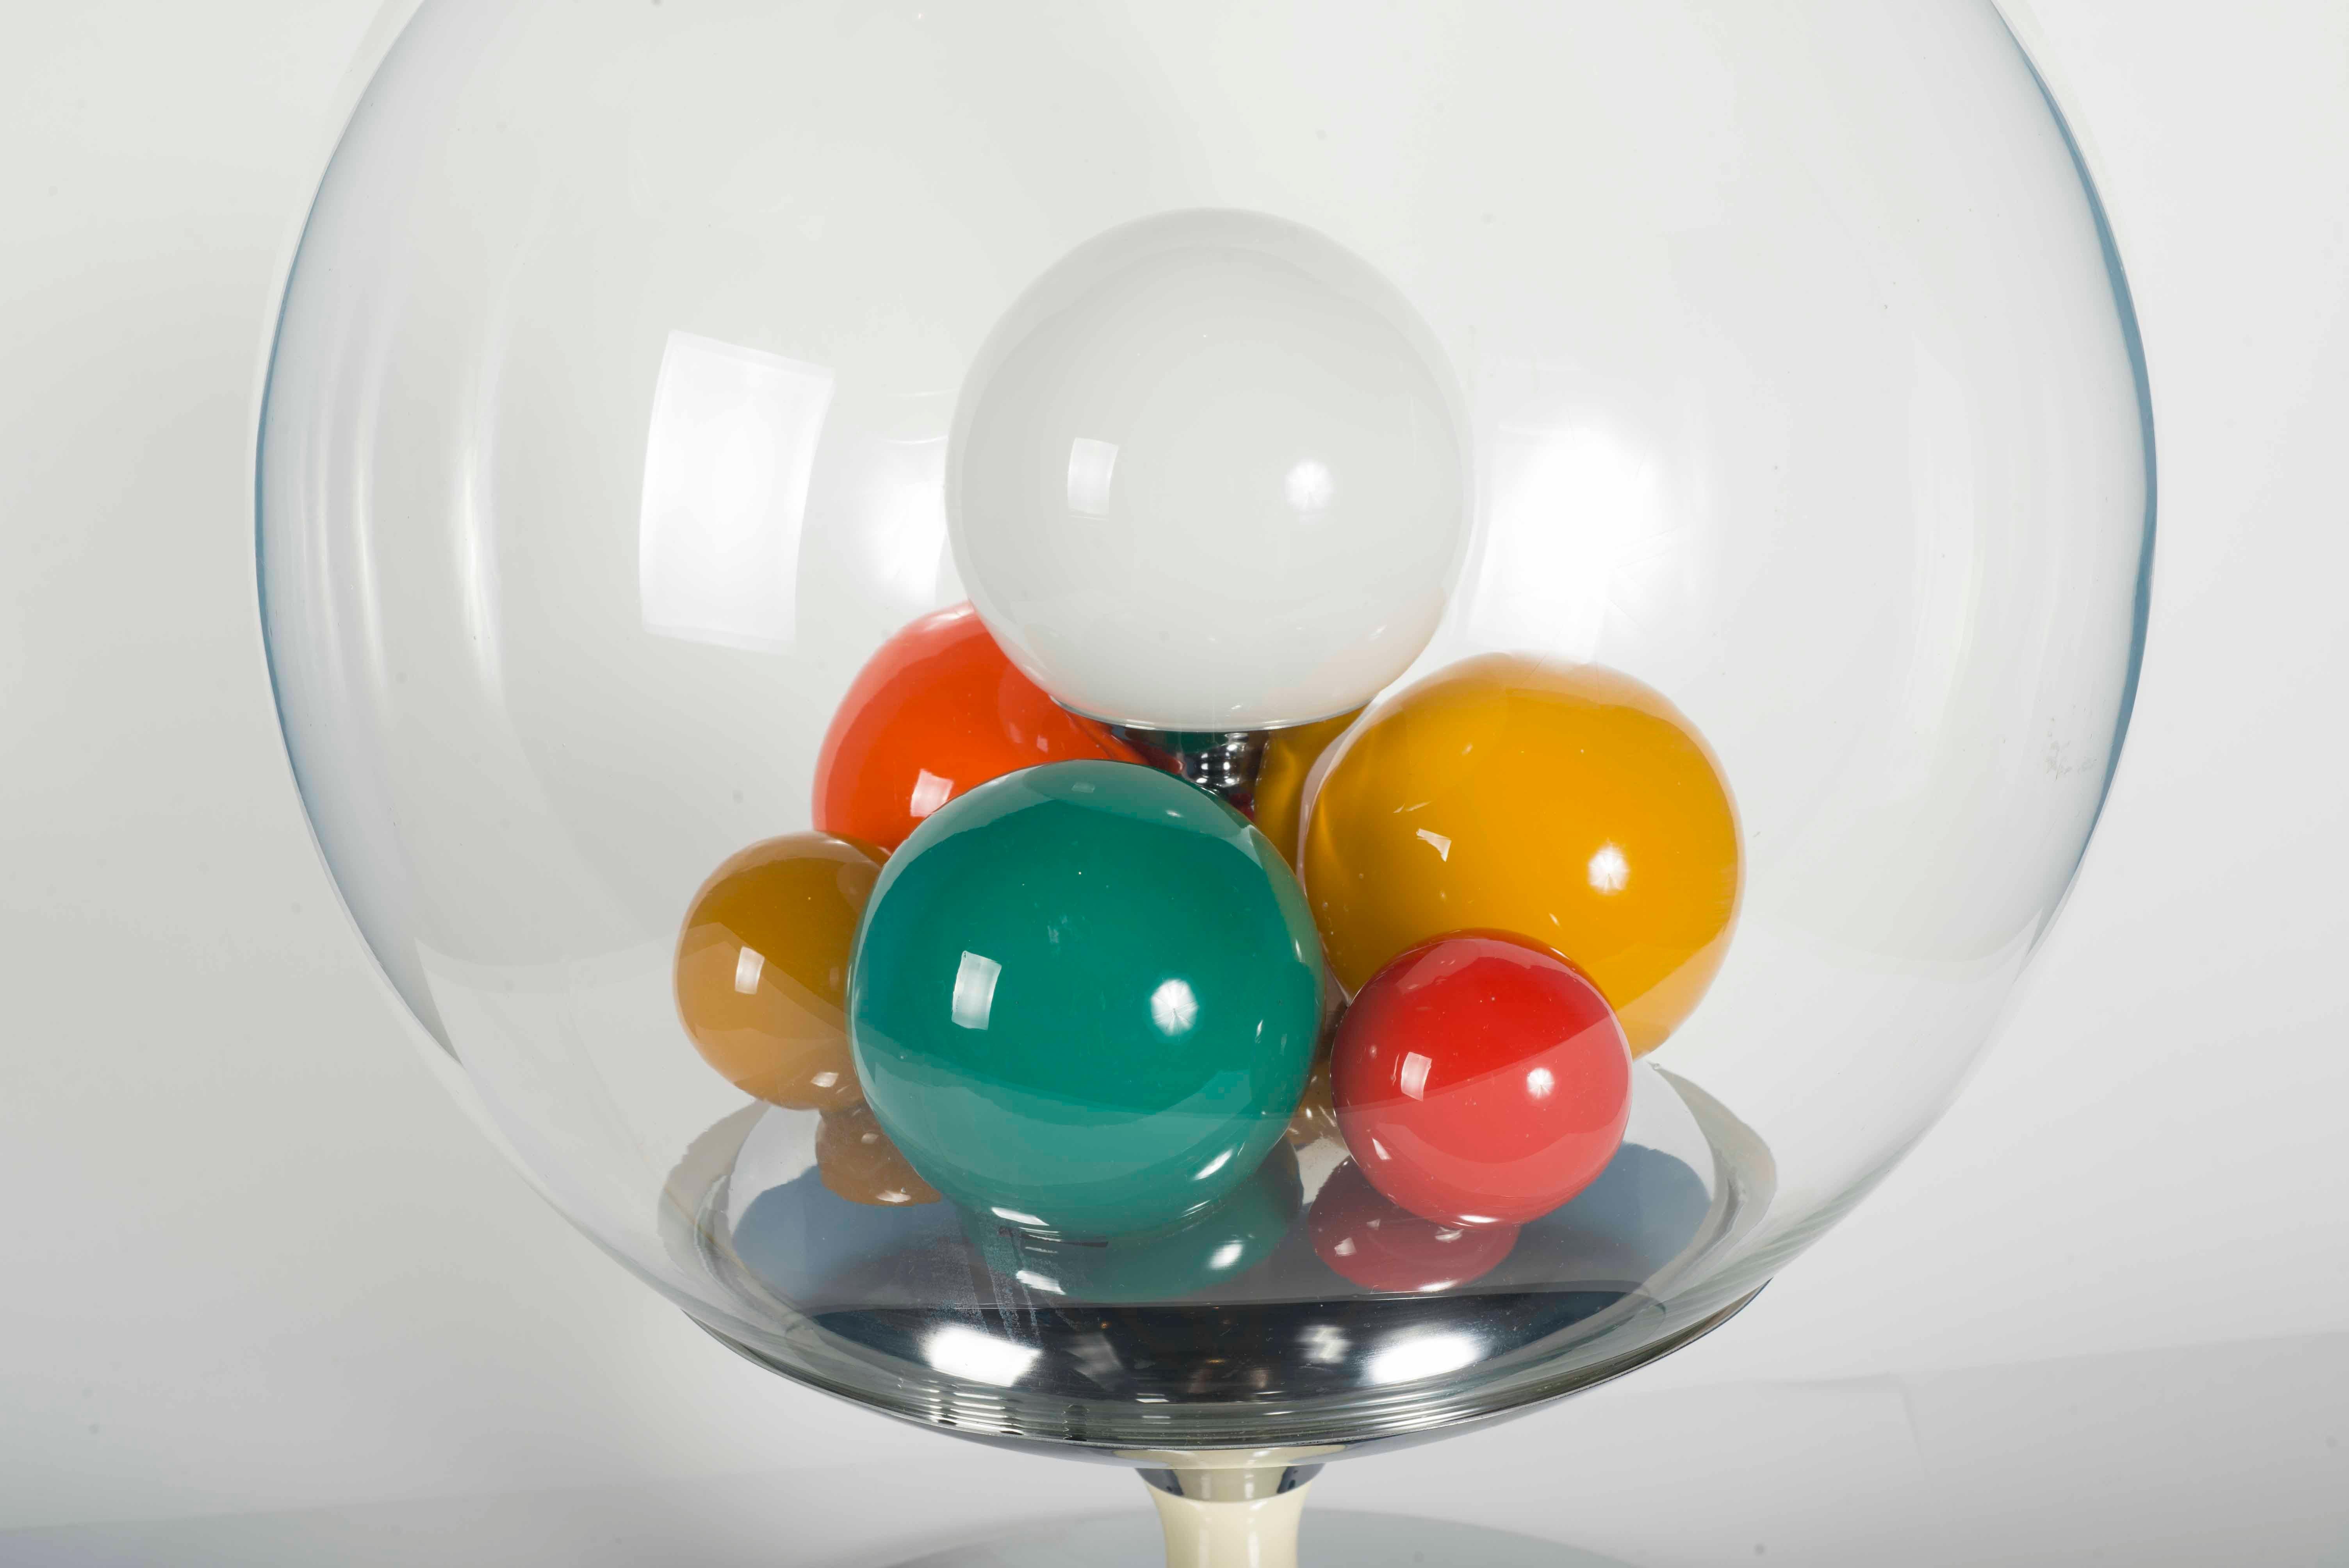 Table lamp designed by Angelo Brotto for Esperia, Italy 1965. This lamp has small glass blown balls of different colors inside that illuminate and give a colorful light. Chromed metal tulip foot, with wooden middle piece and glass bowl.